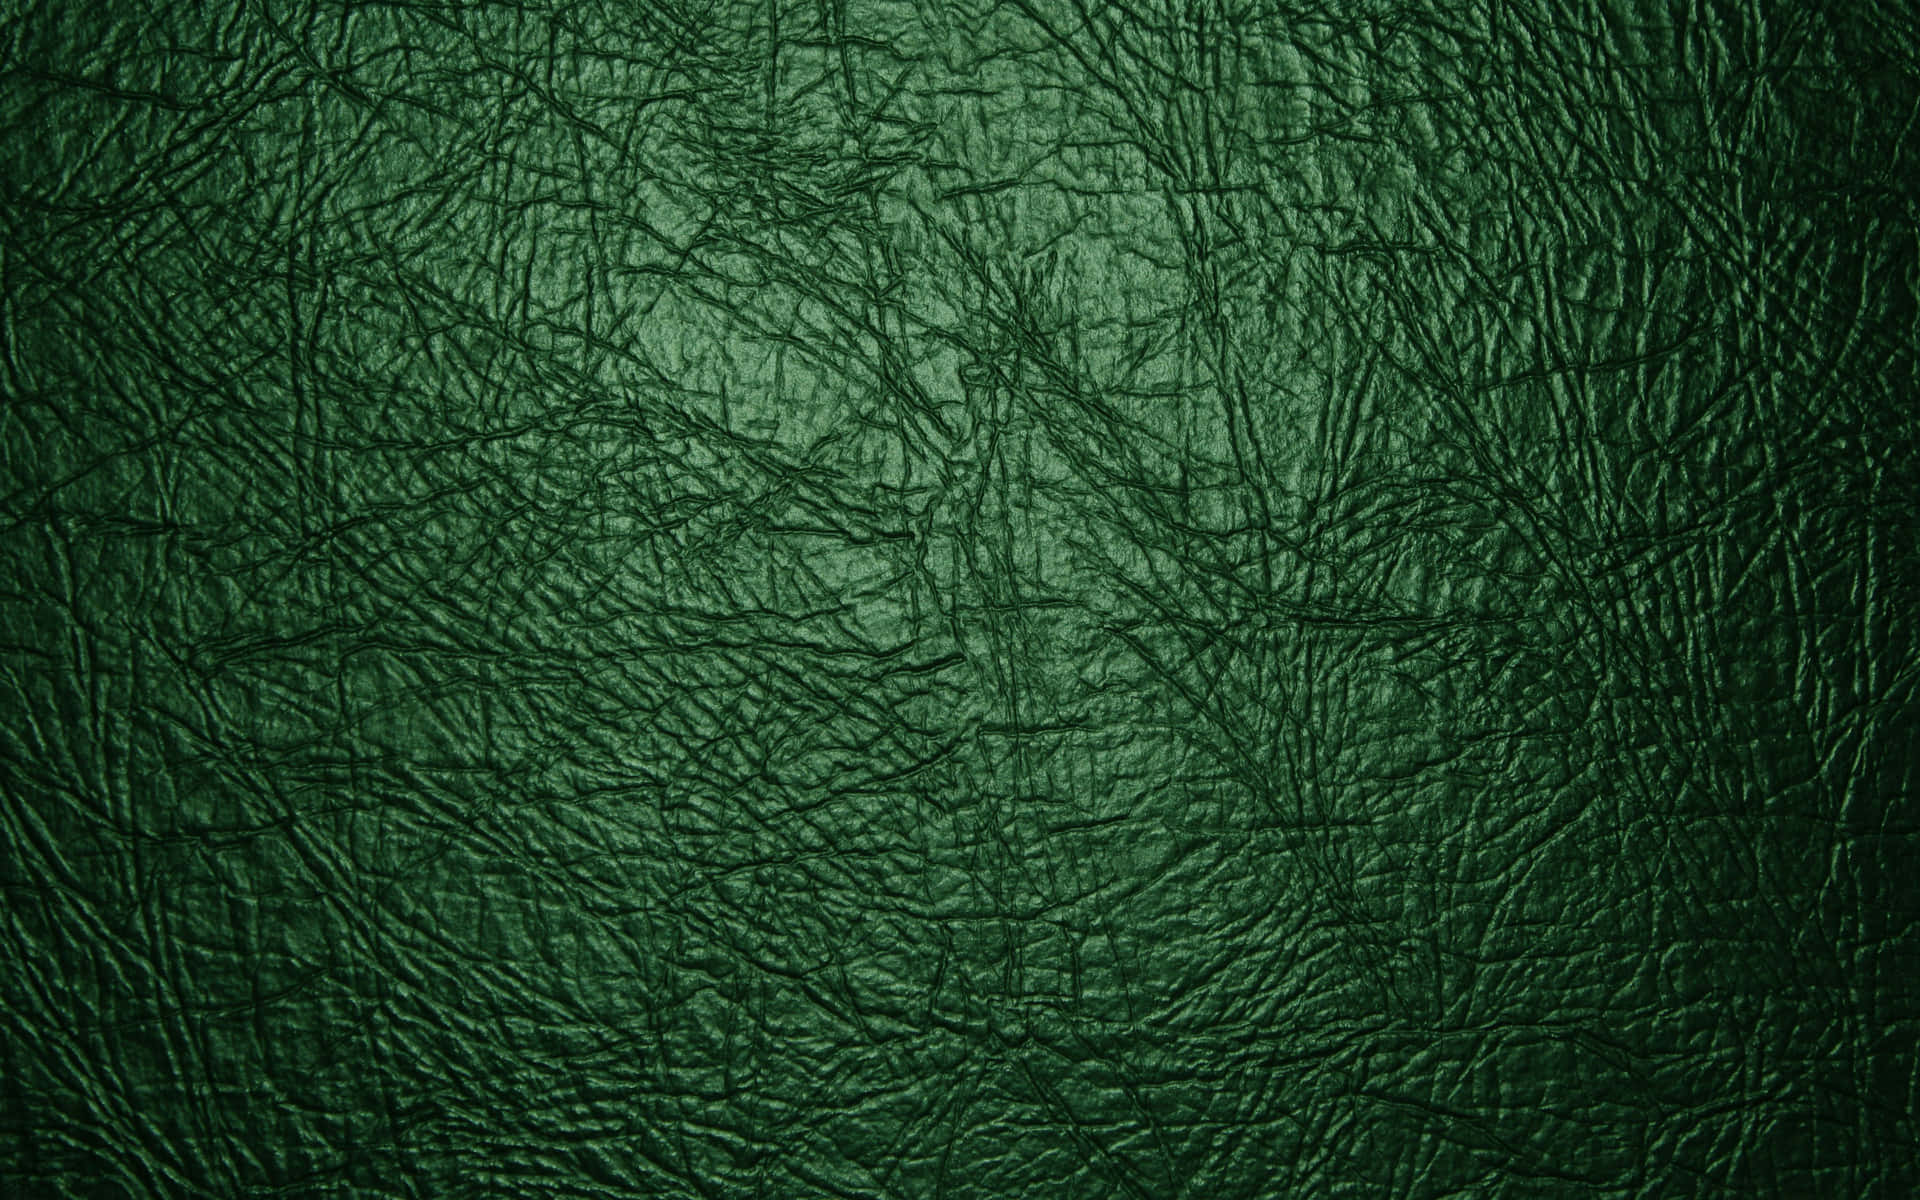 Striking Shimmer of a Green Leather Texture Wallpaper